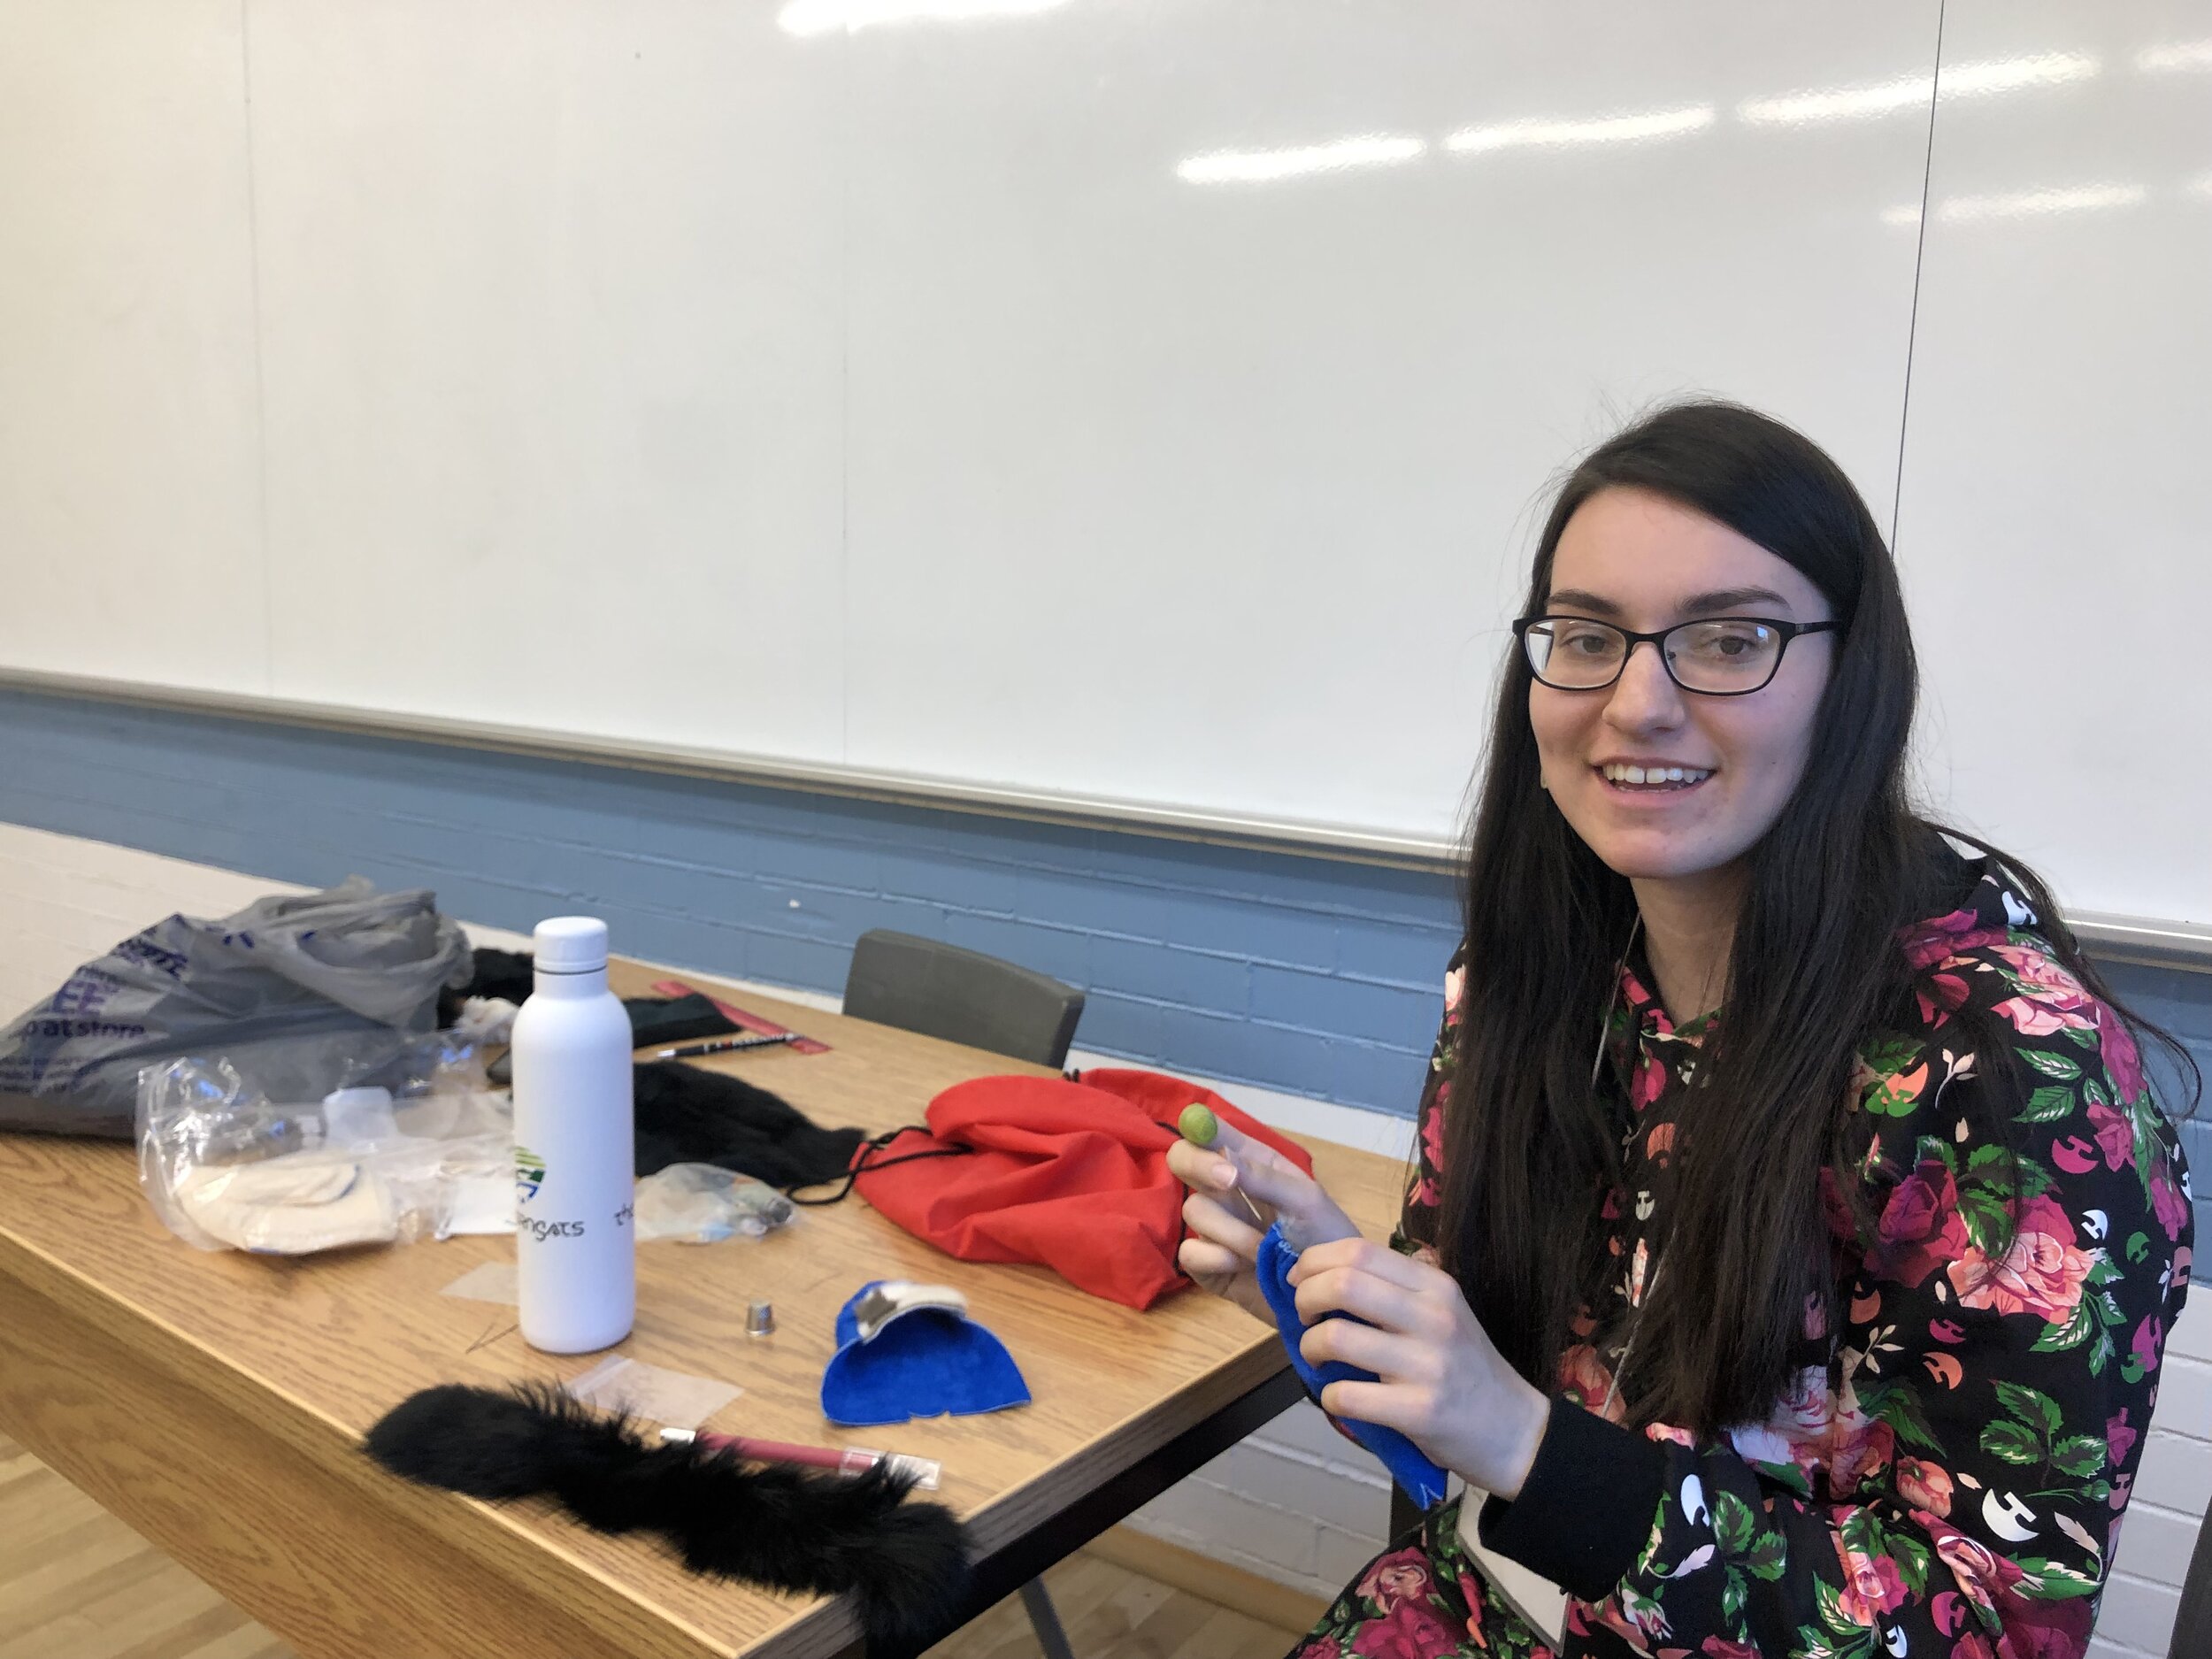  Veronica Flowers demonstrates sewing techniques during the Labrador Inuit Slipper Making Workshop. Veronica and Vanessa Flowers led the workshop at the 21st Inuit Studies Conference, UQAM, Montreal QC. October 2019. Photo courtesy of Heather Iglolio